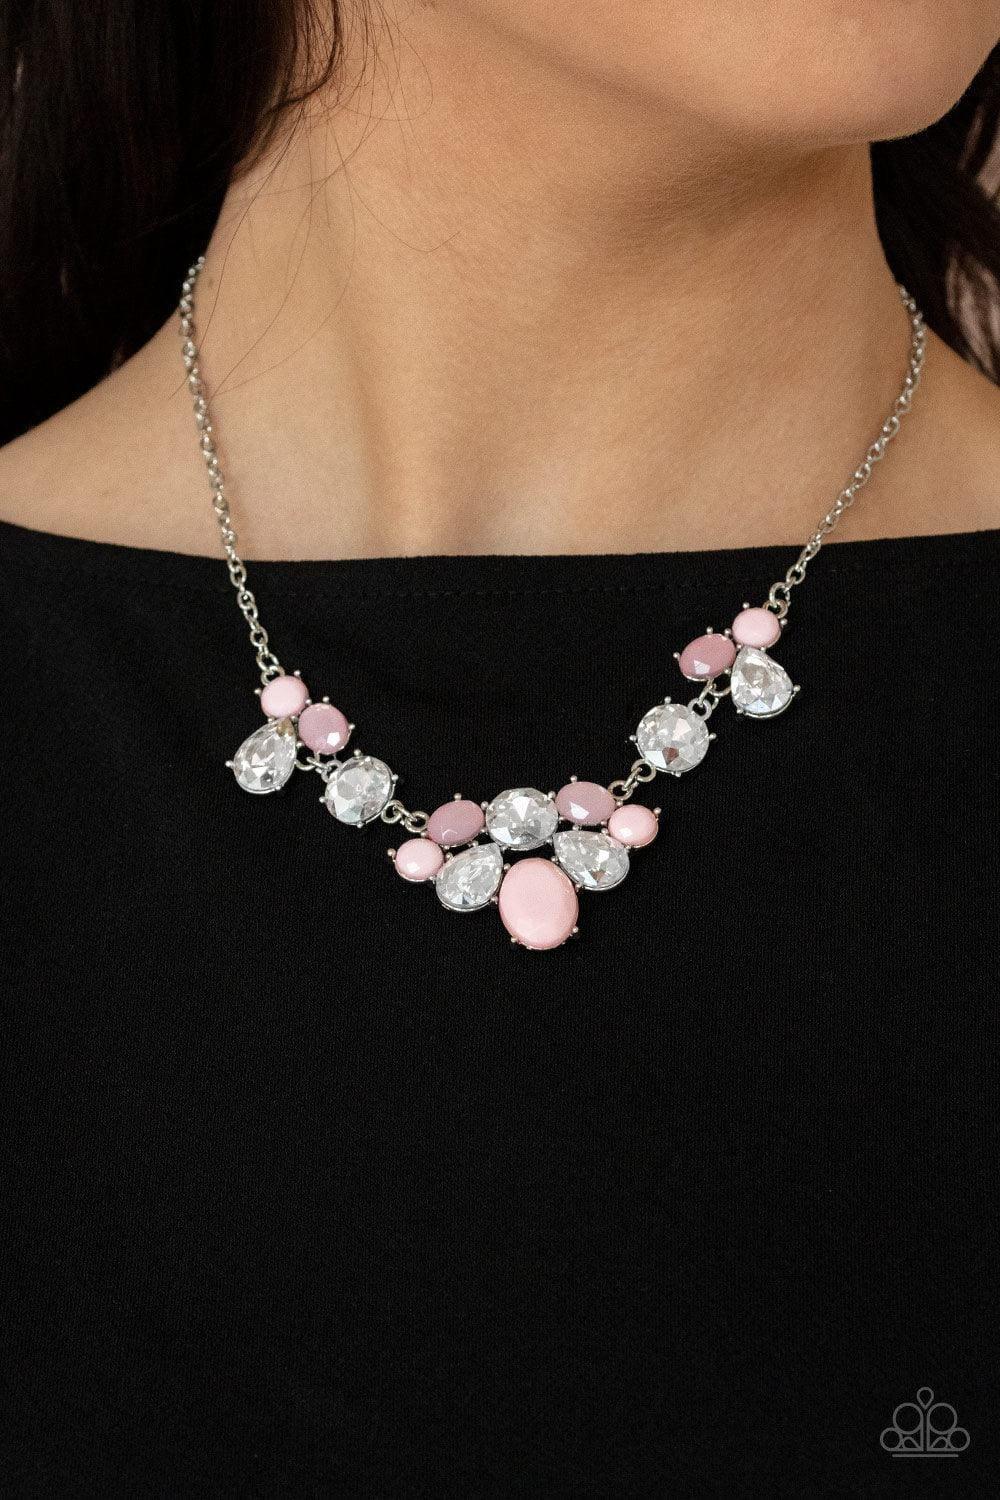 Paparazzi Accessories - Ethereal Romance - Pink Necklace - Bling by JessieK